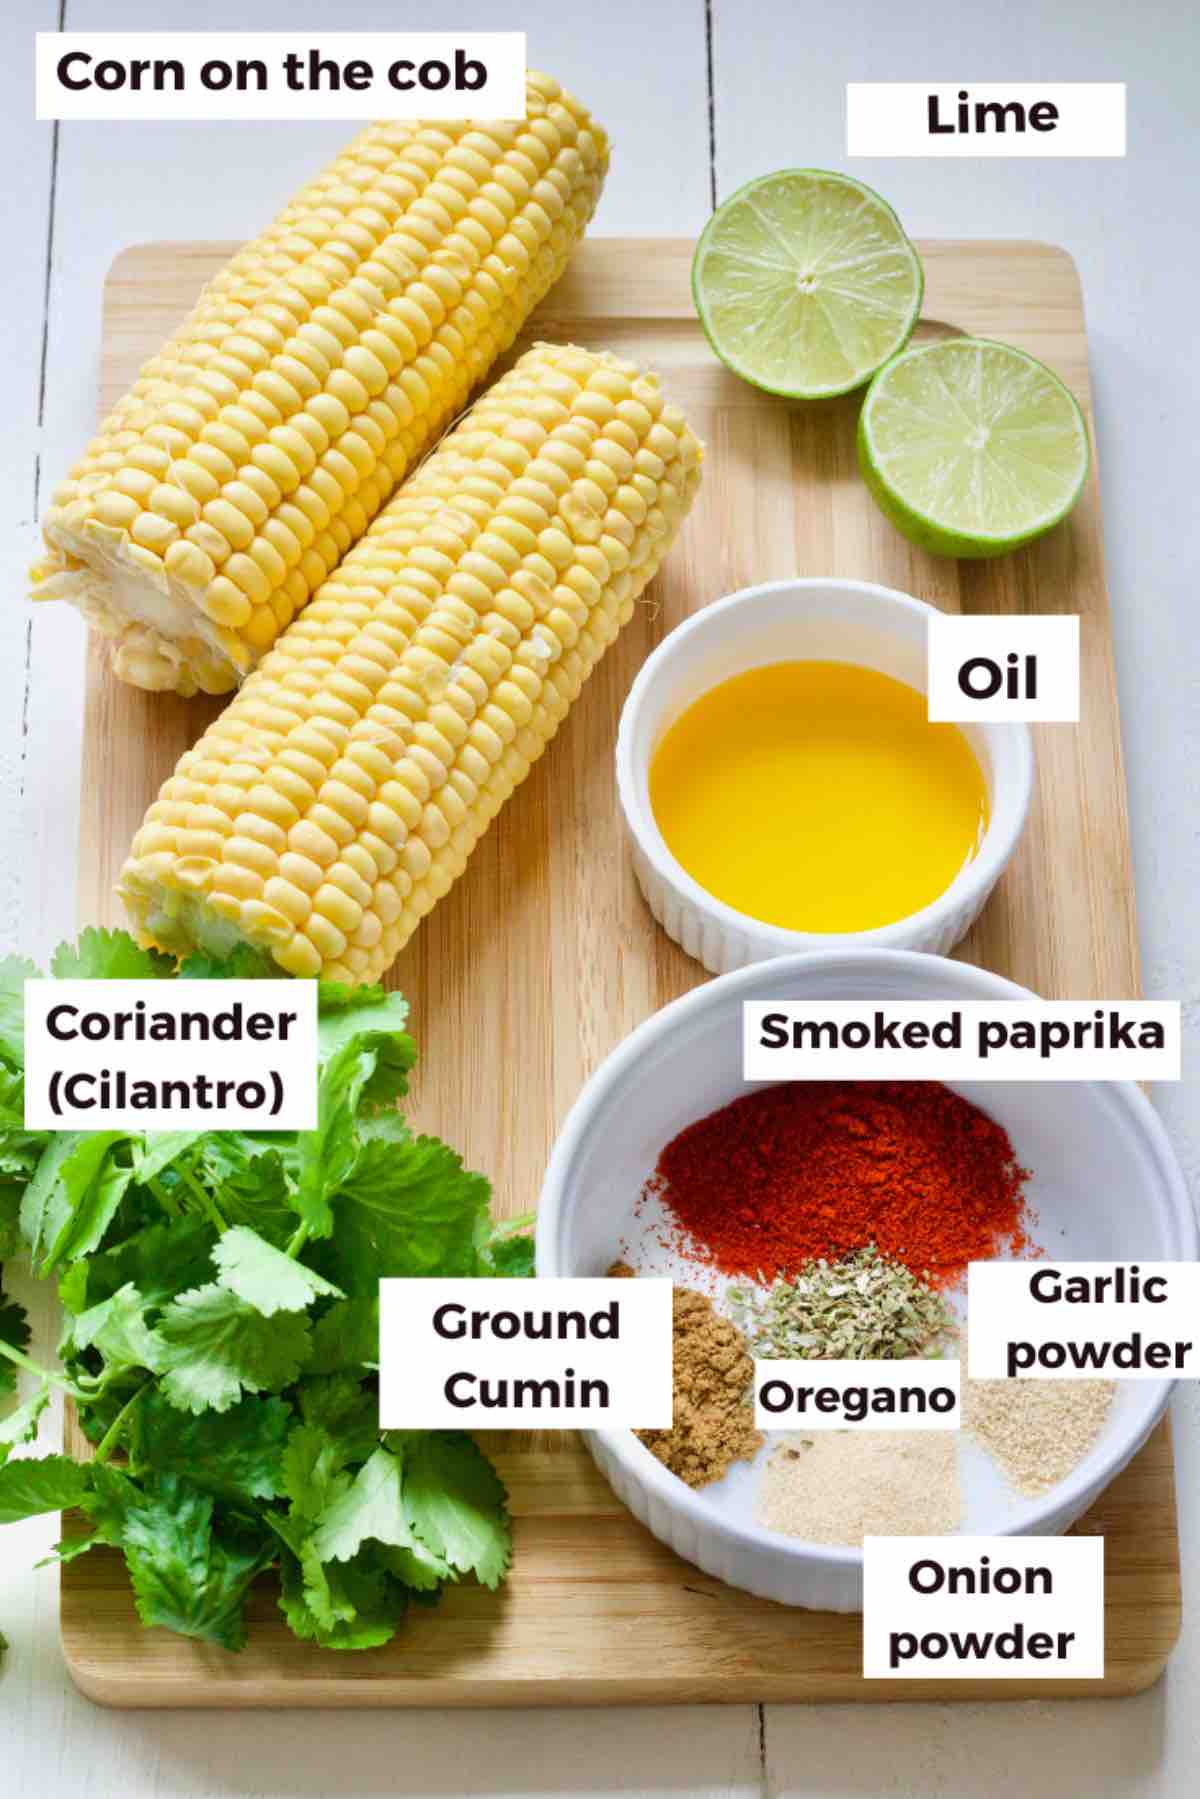 Ingredients for making corn ribs.